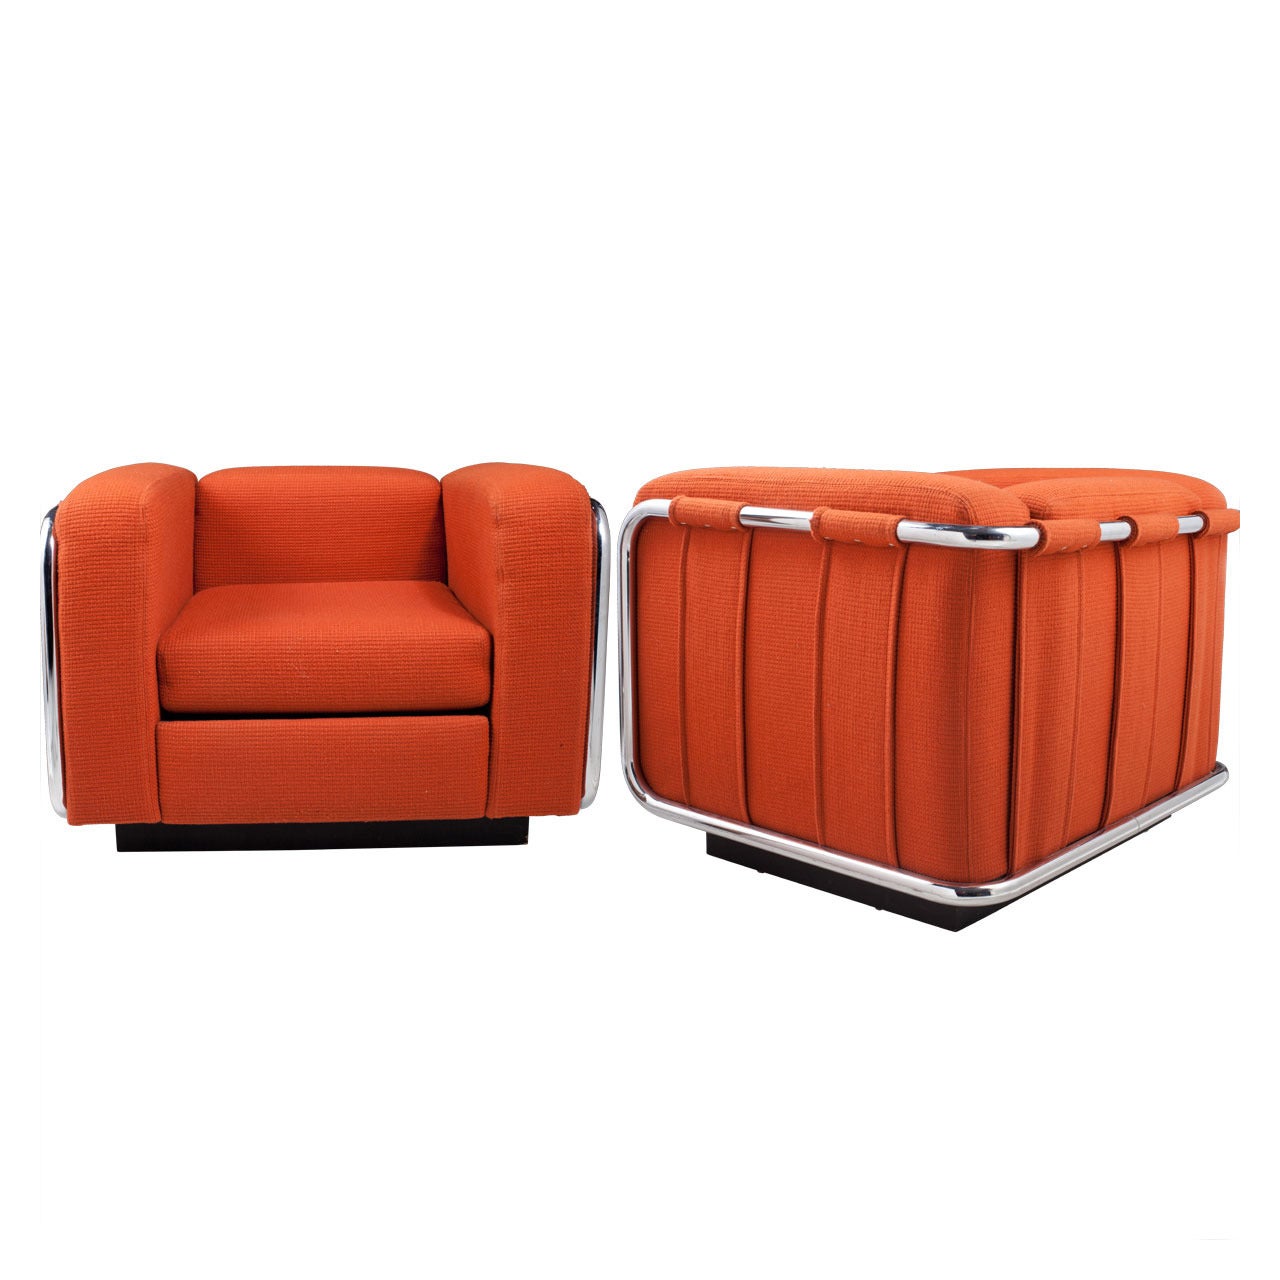 Pair of Cube Form Club Chairs